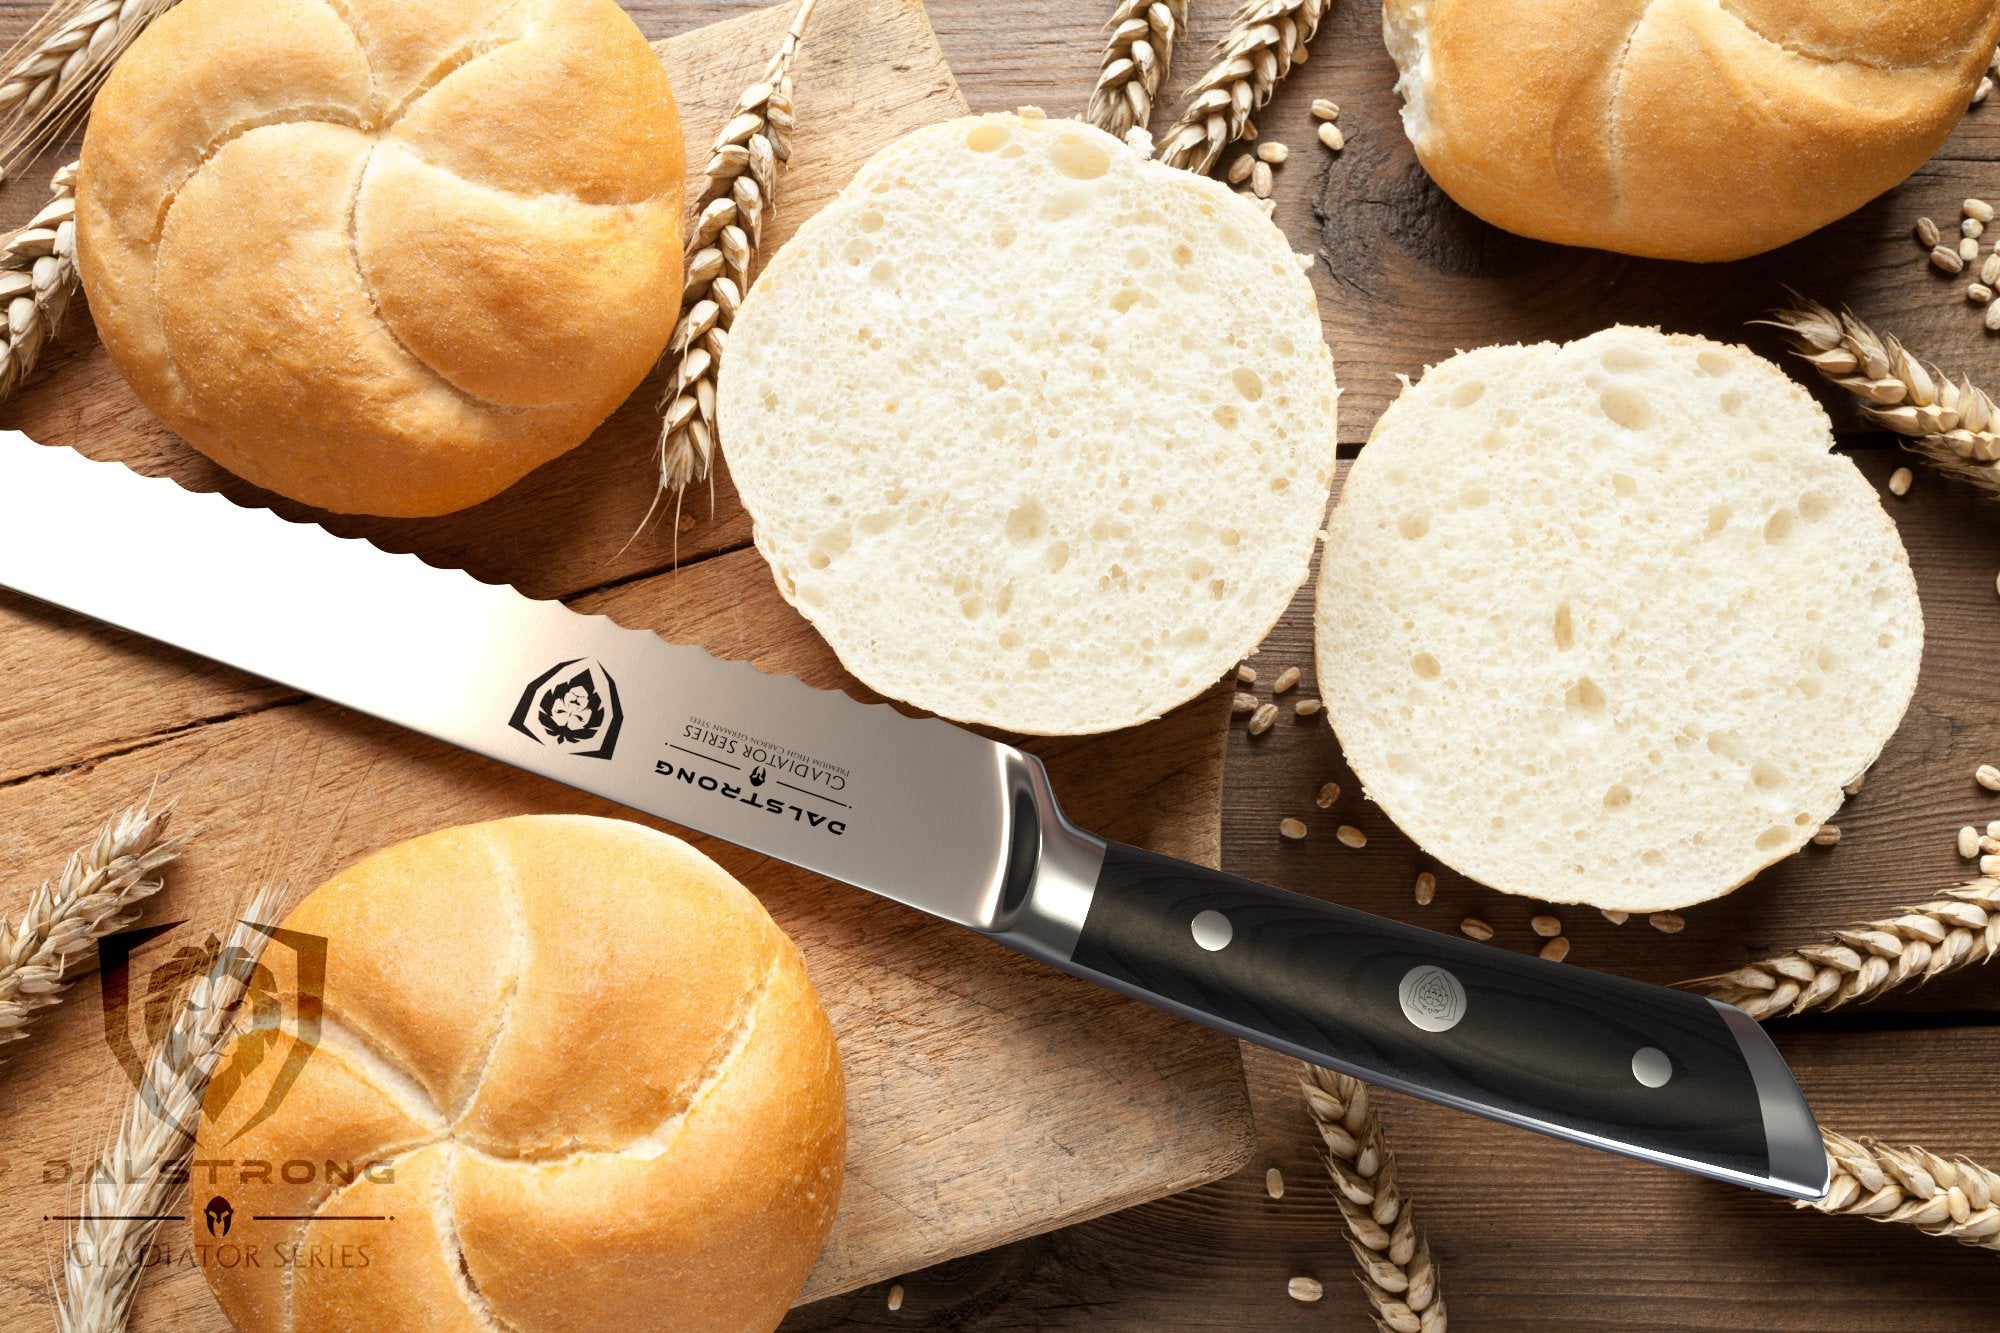 Dalstrong 10" Serrated Bread Knife